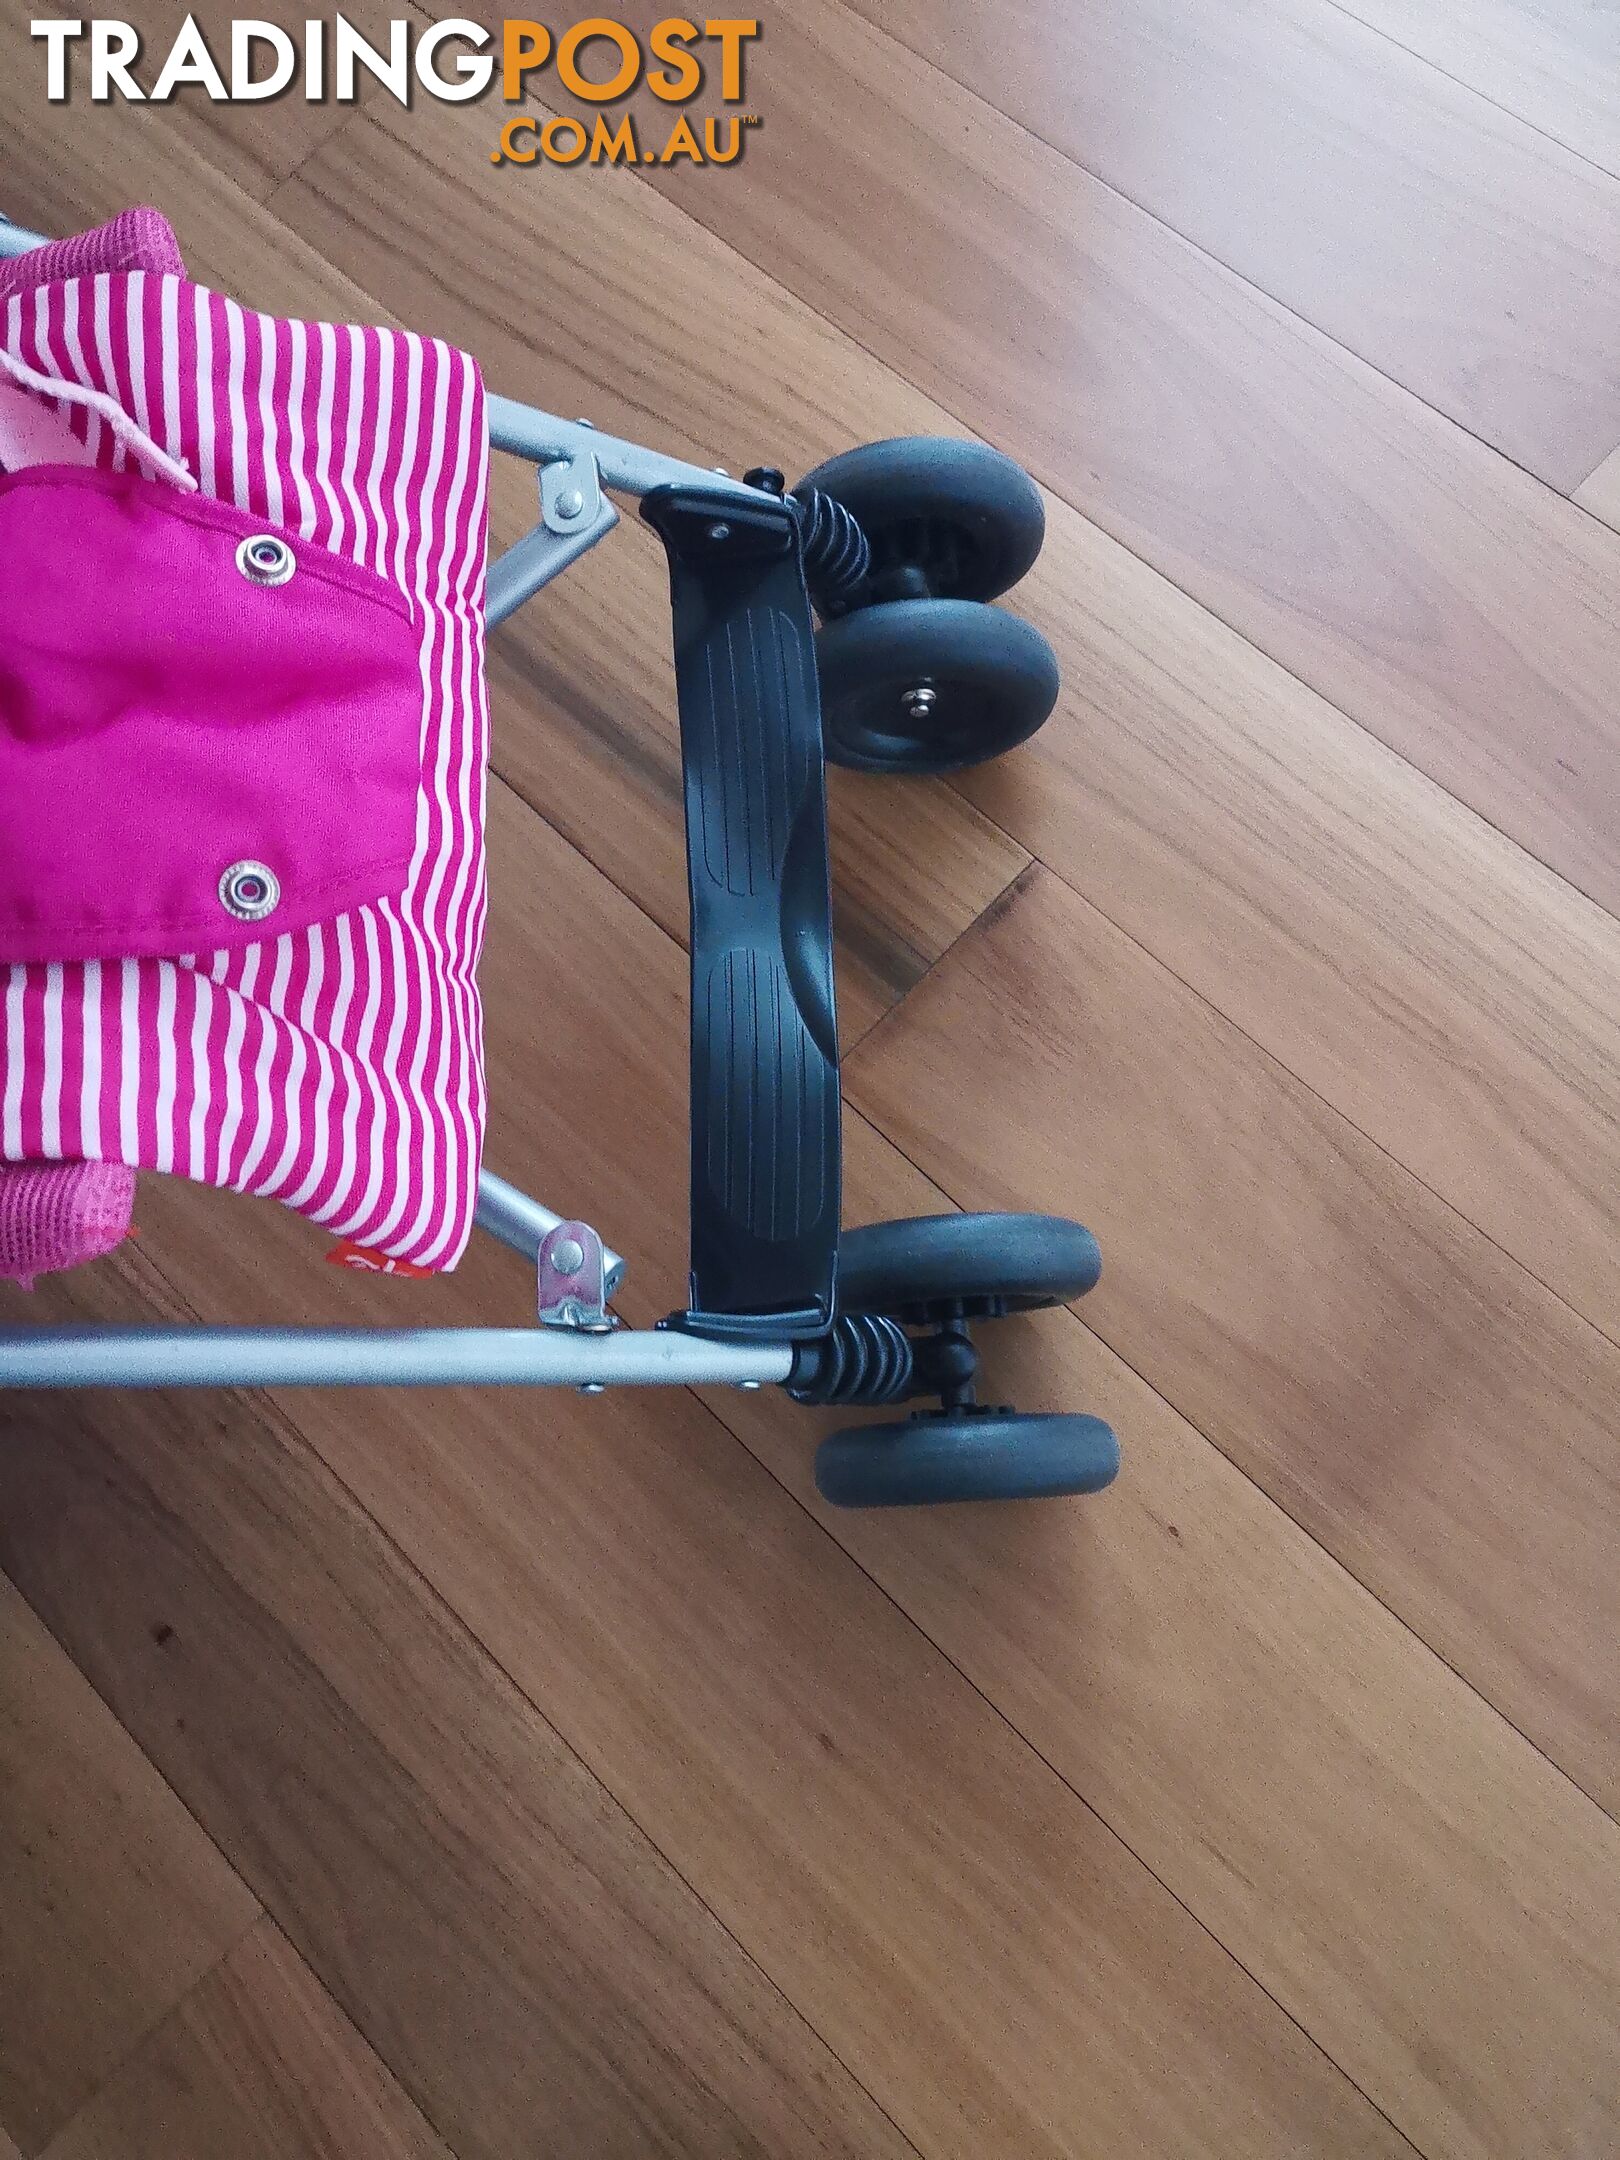 The baby stroller, weighing only 4.7 kilograms, is suitable for carrying onto airplanes.